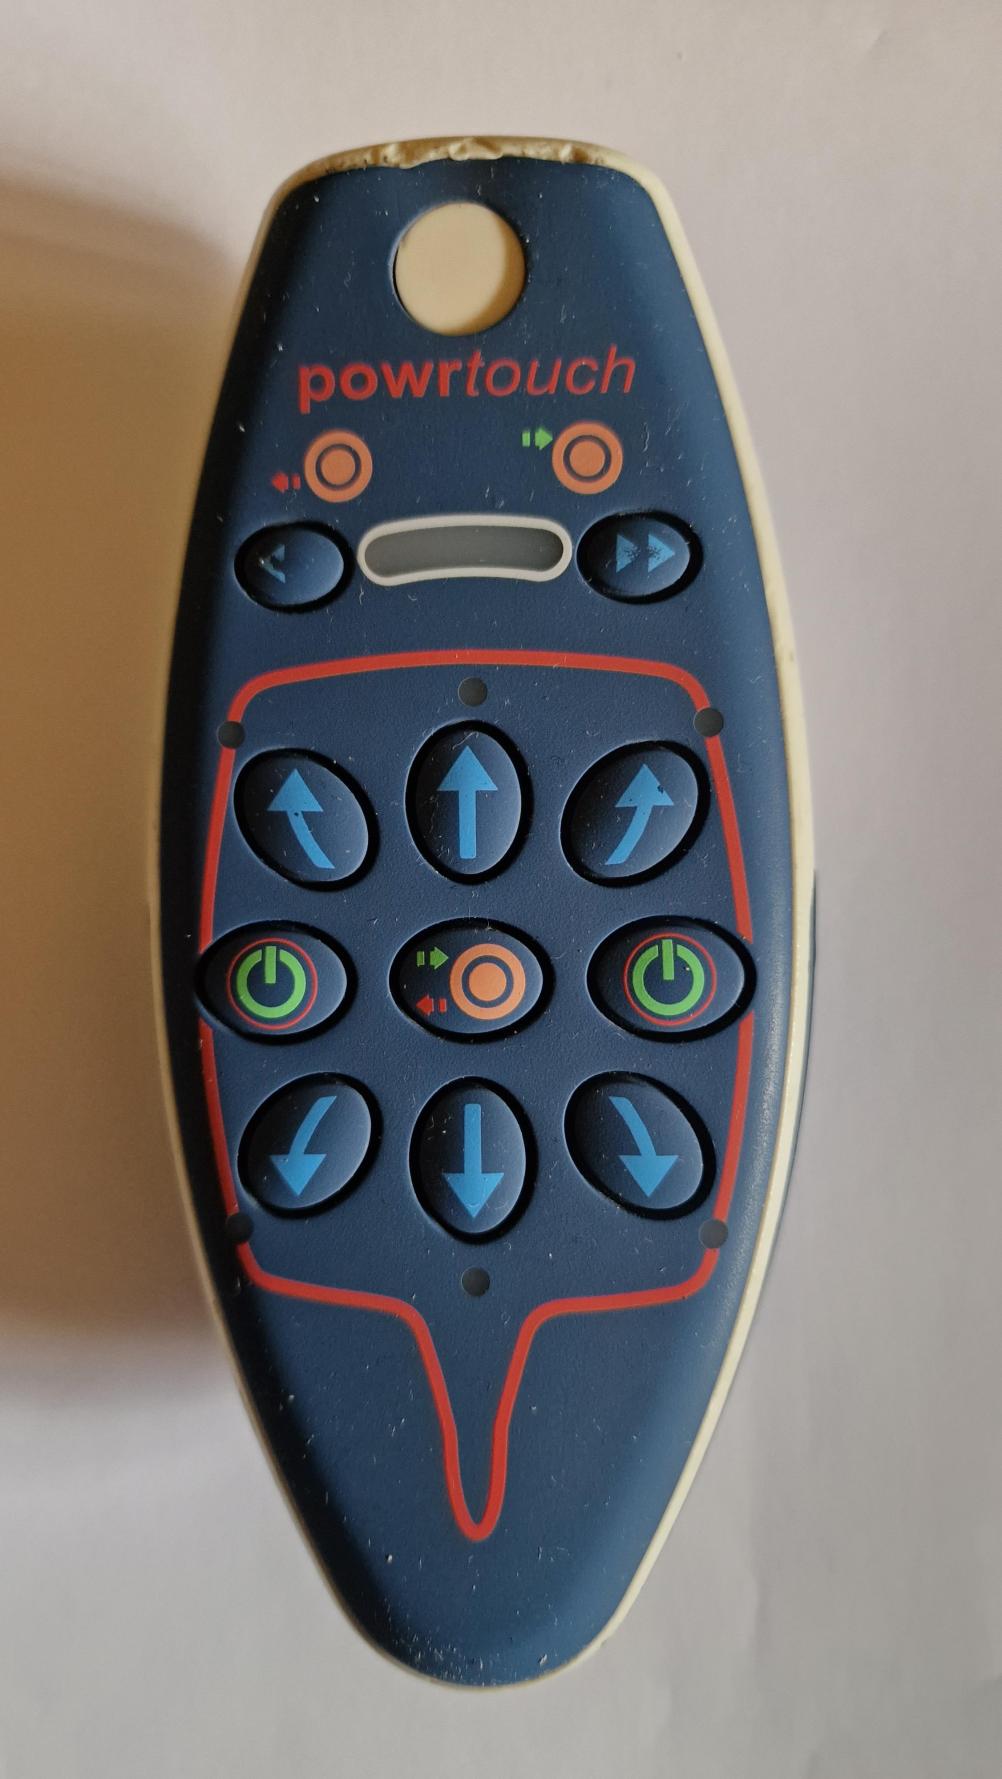 Powertouch evolution  Remote Control - Front Image